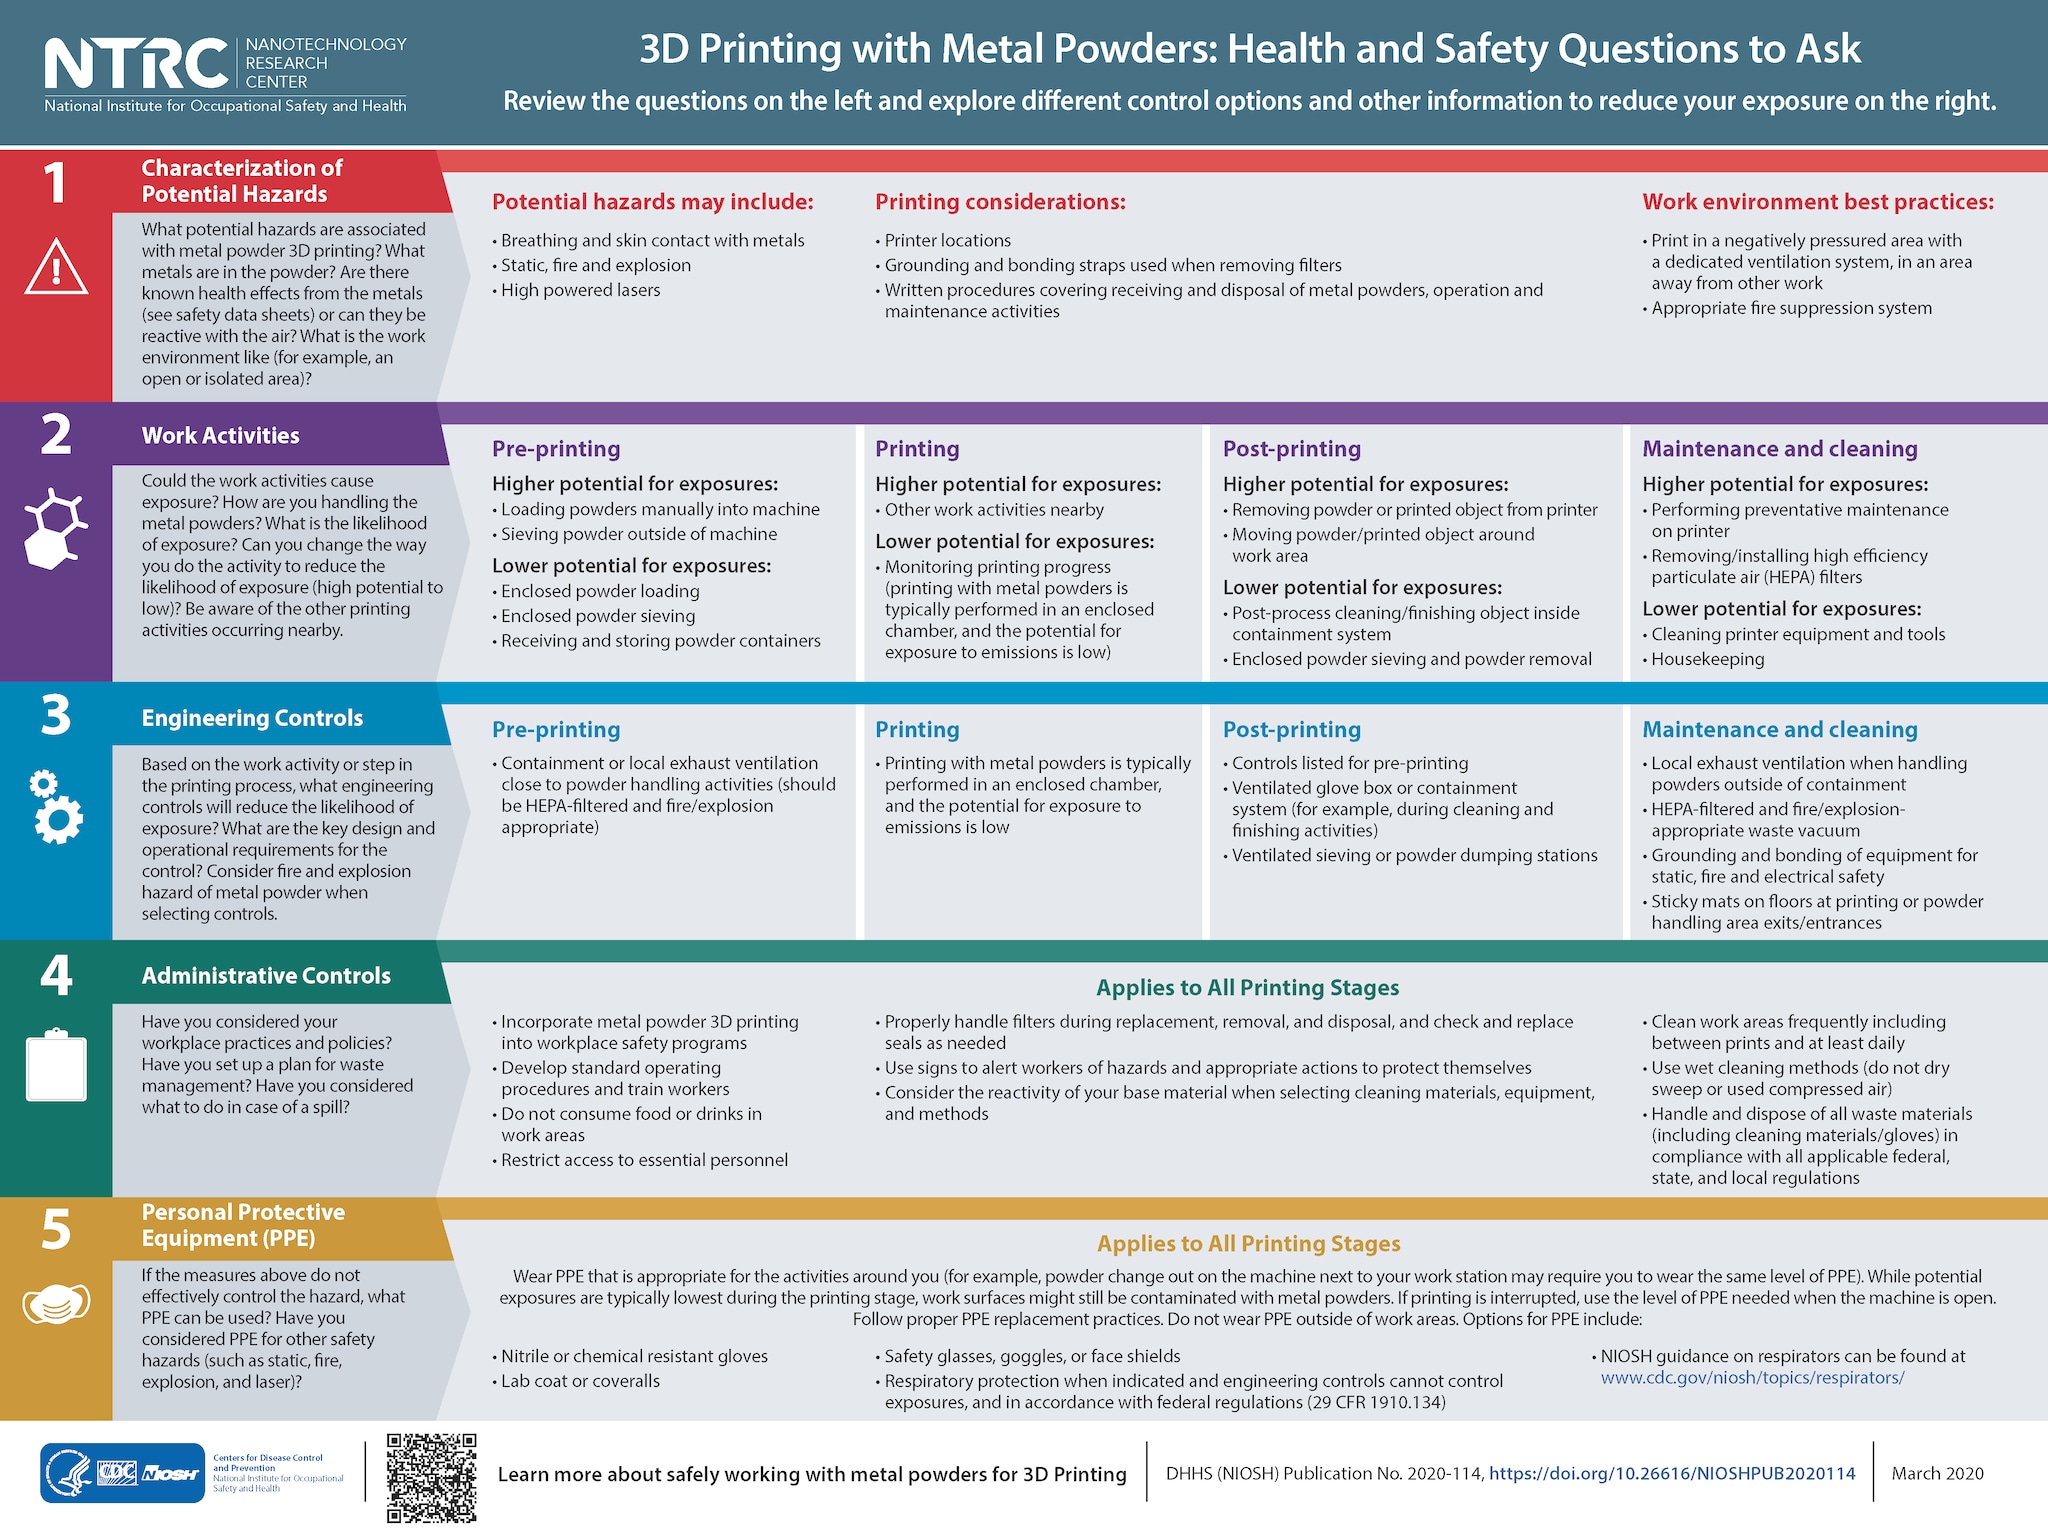 This poster from the NIOSH Nanotechnology Research Center cites health and safety questions with different control options and information to reduce exposure to potential hazards when 3D printing with Metal Powders